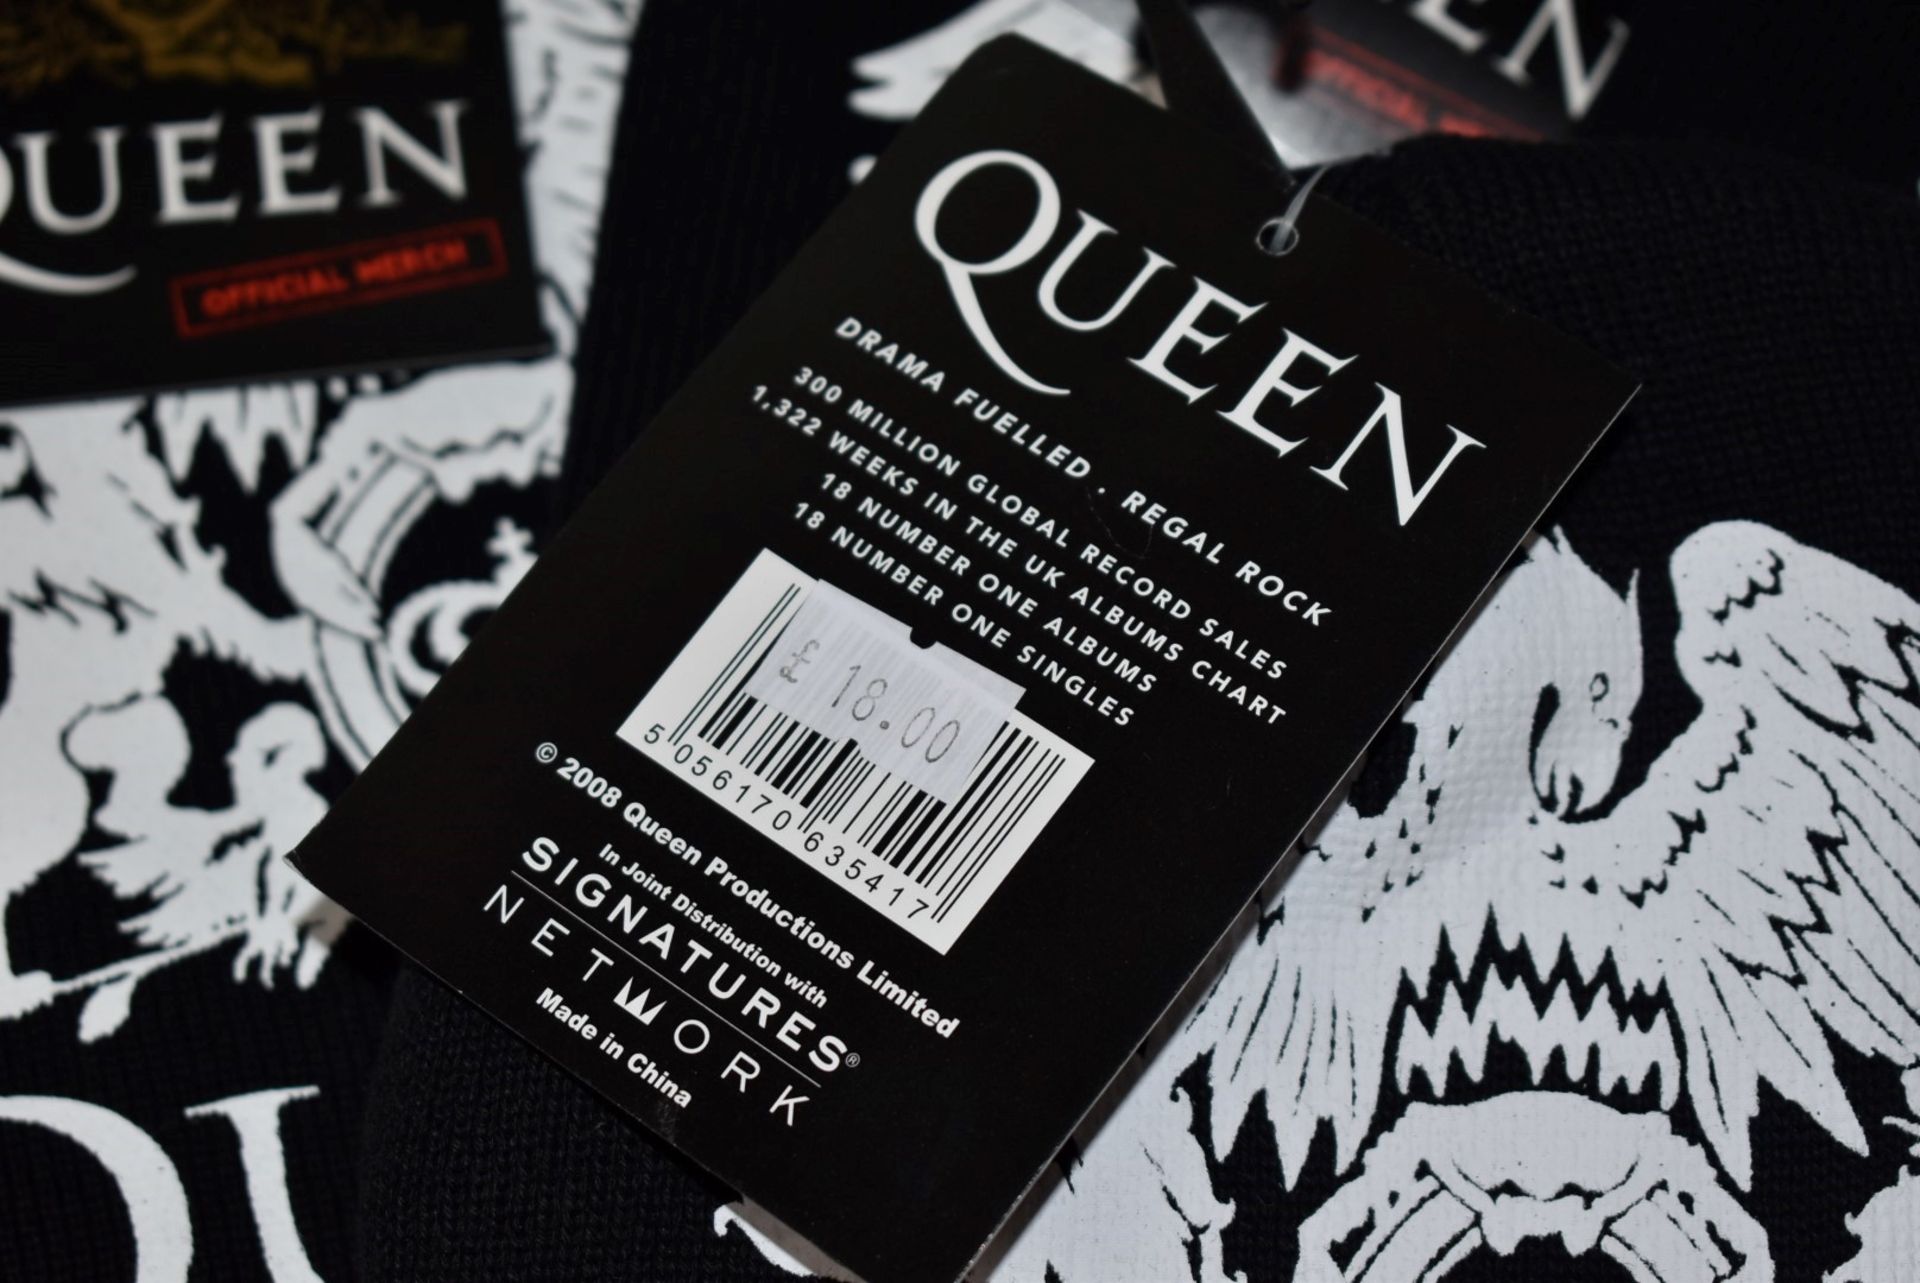 6 x Queen Unisex Beanie Hats - Officially Licensed Merchandise - New With Tags - RRP £108 - Ref: - Image 5 of 6